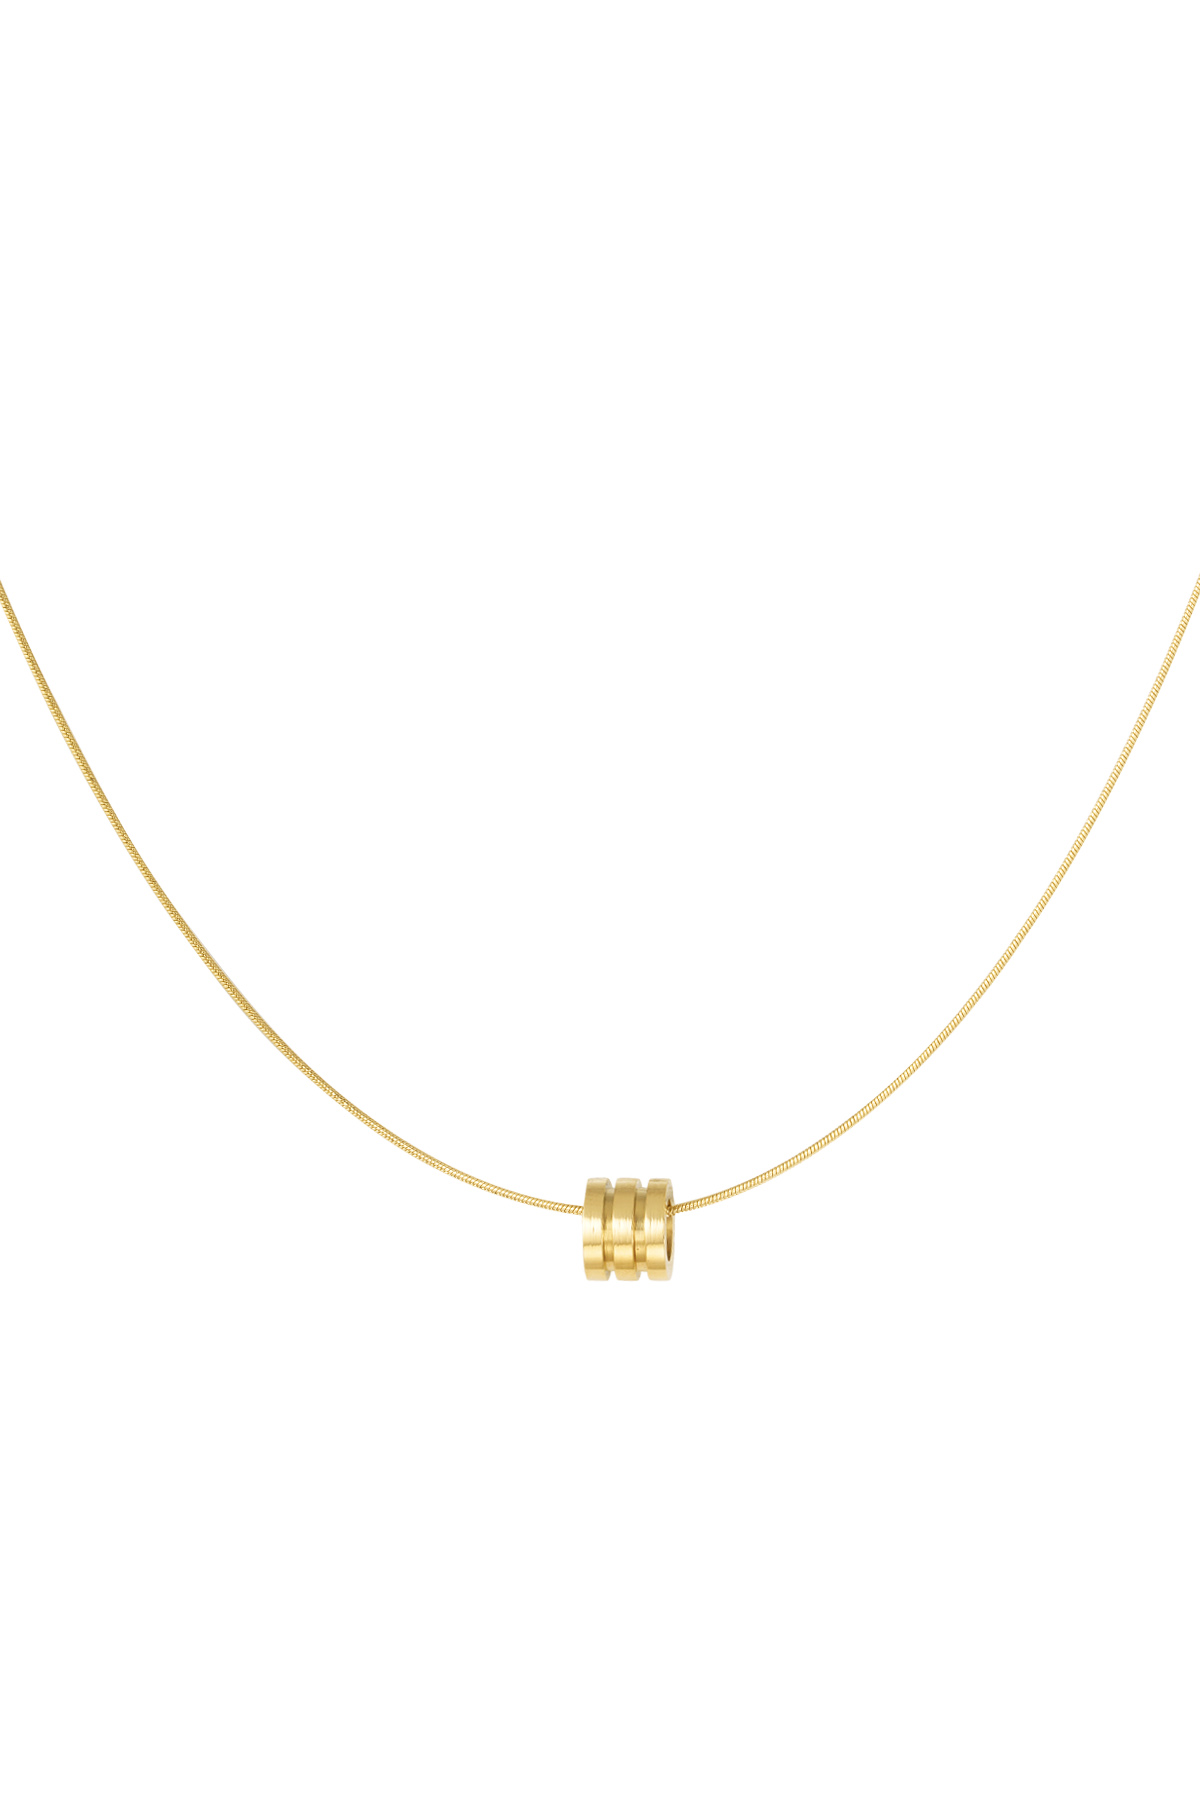 Necklace three-layer charm - gold 